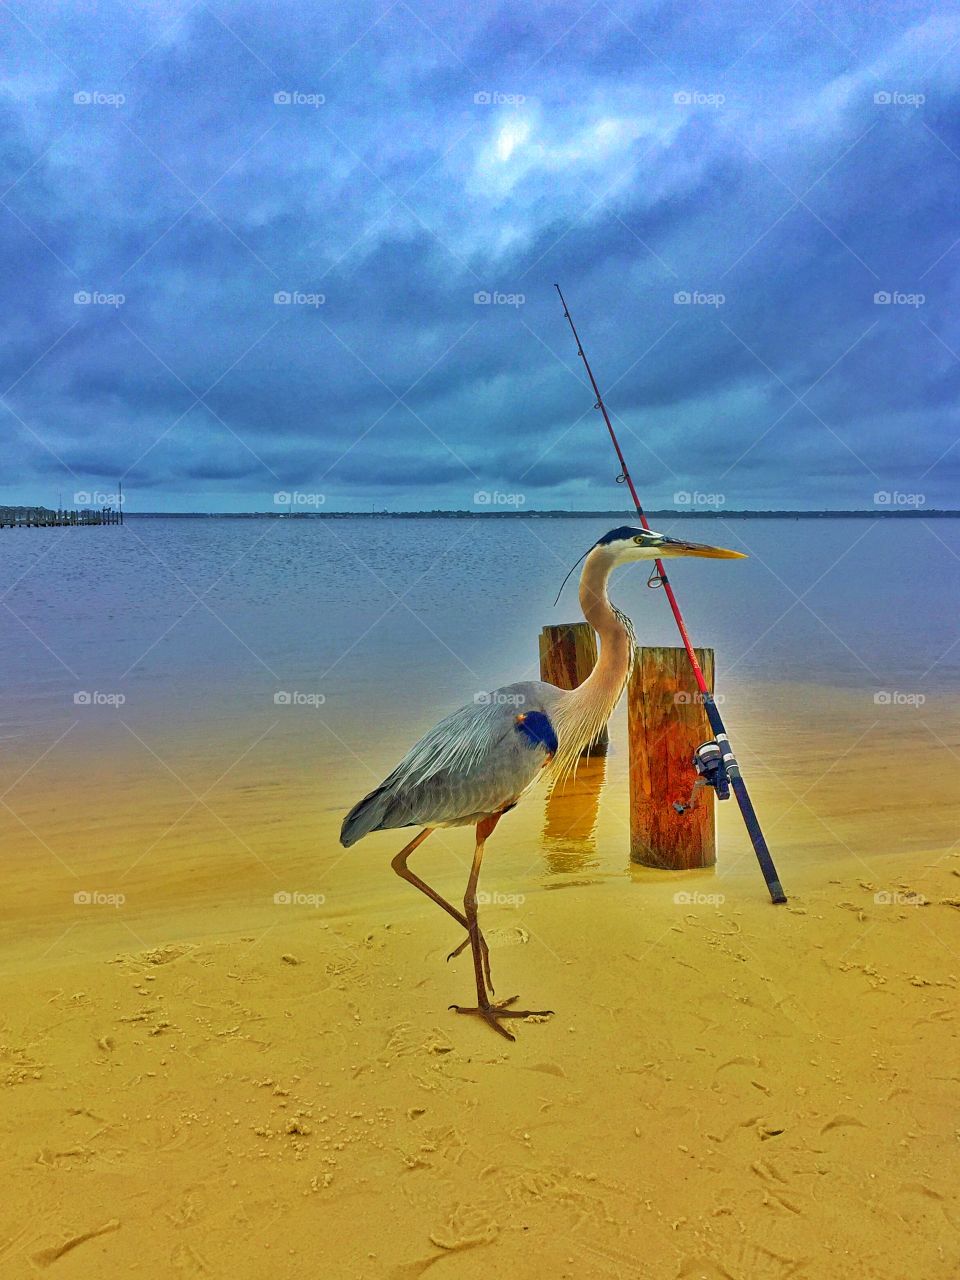 Heron hoping for handout from fisherman